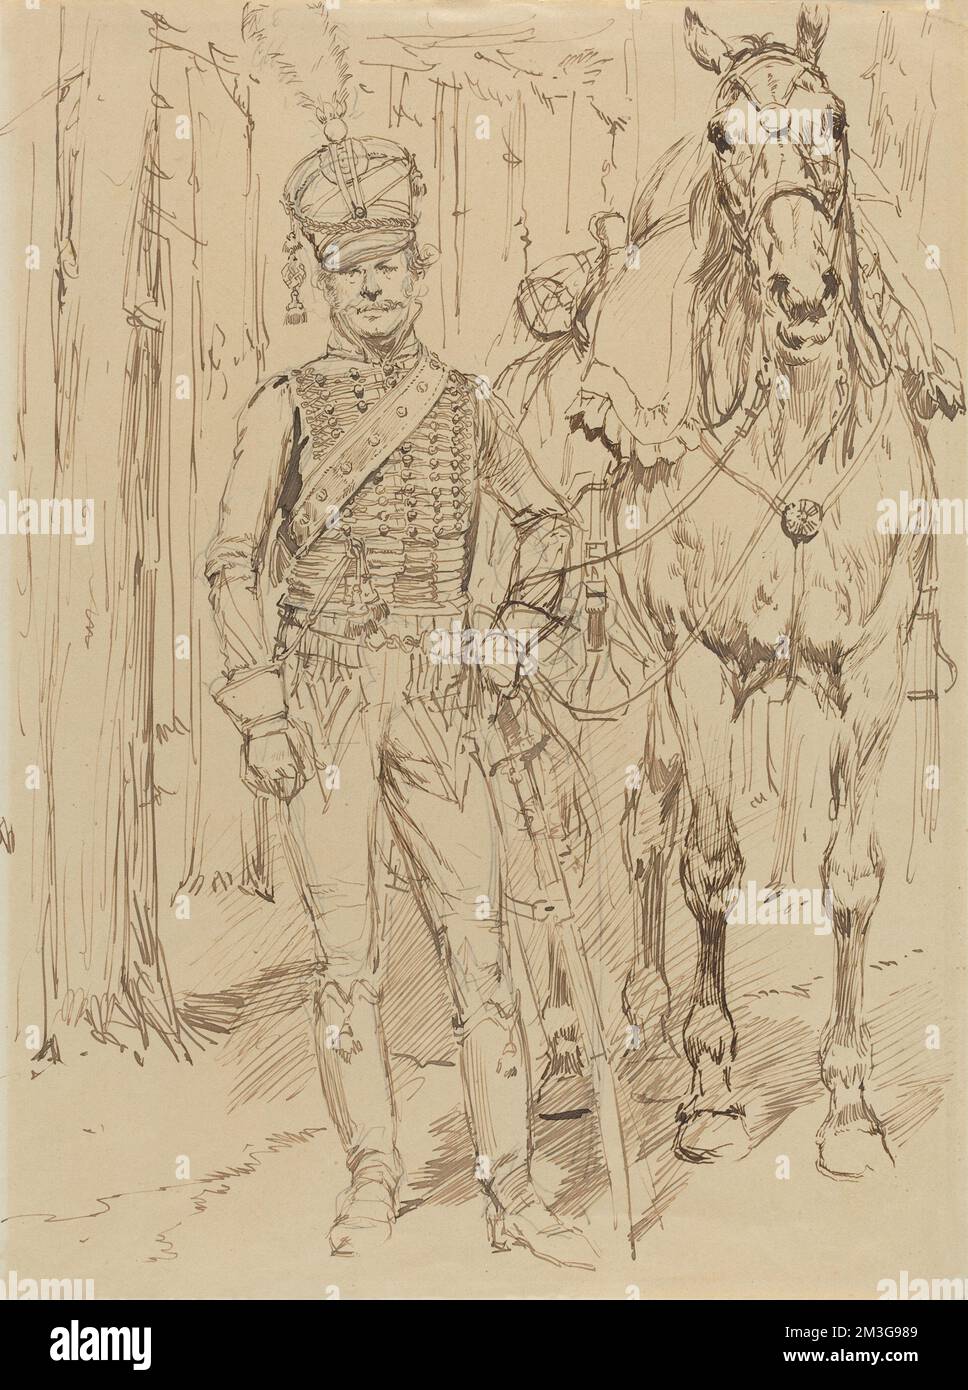 'Jean-Baptiste-Edouard Detaille, A French Hussar Leading a Horse, 0, pen and brown ink  over graphite on wove paper, overall: 21.8 x 16.2 cm (8 9/16 x 6 3/8 in.), Gift of Frank Anderson Trapp, 2004.166.11' Stock Photo